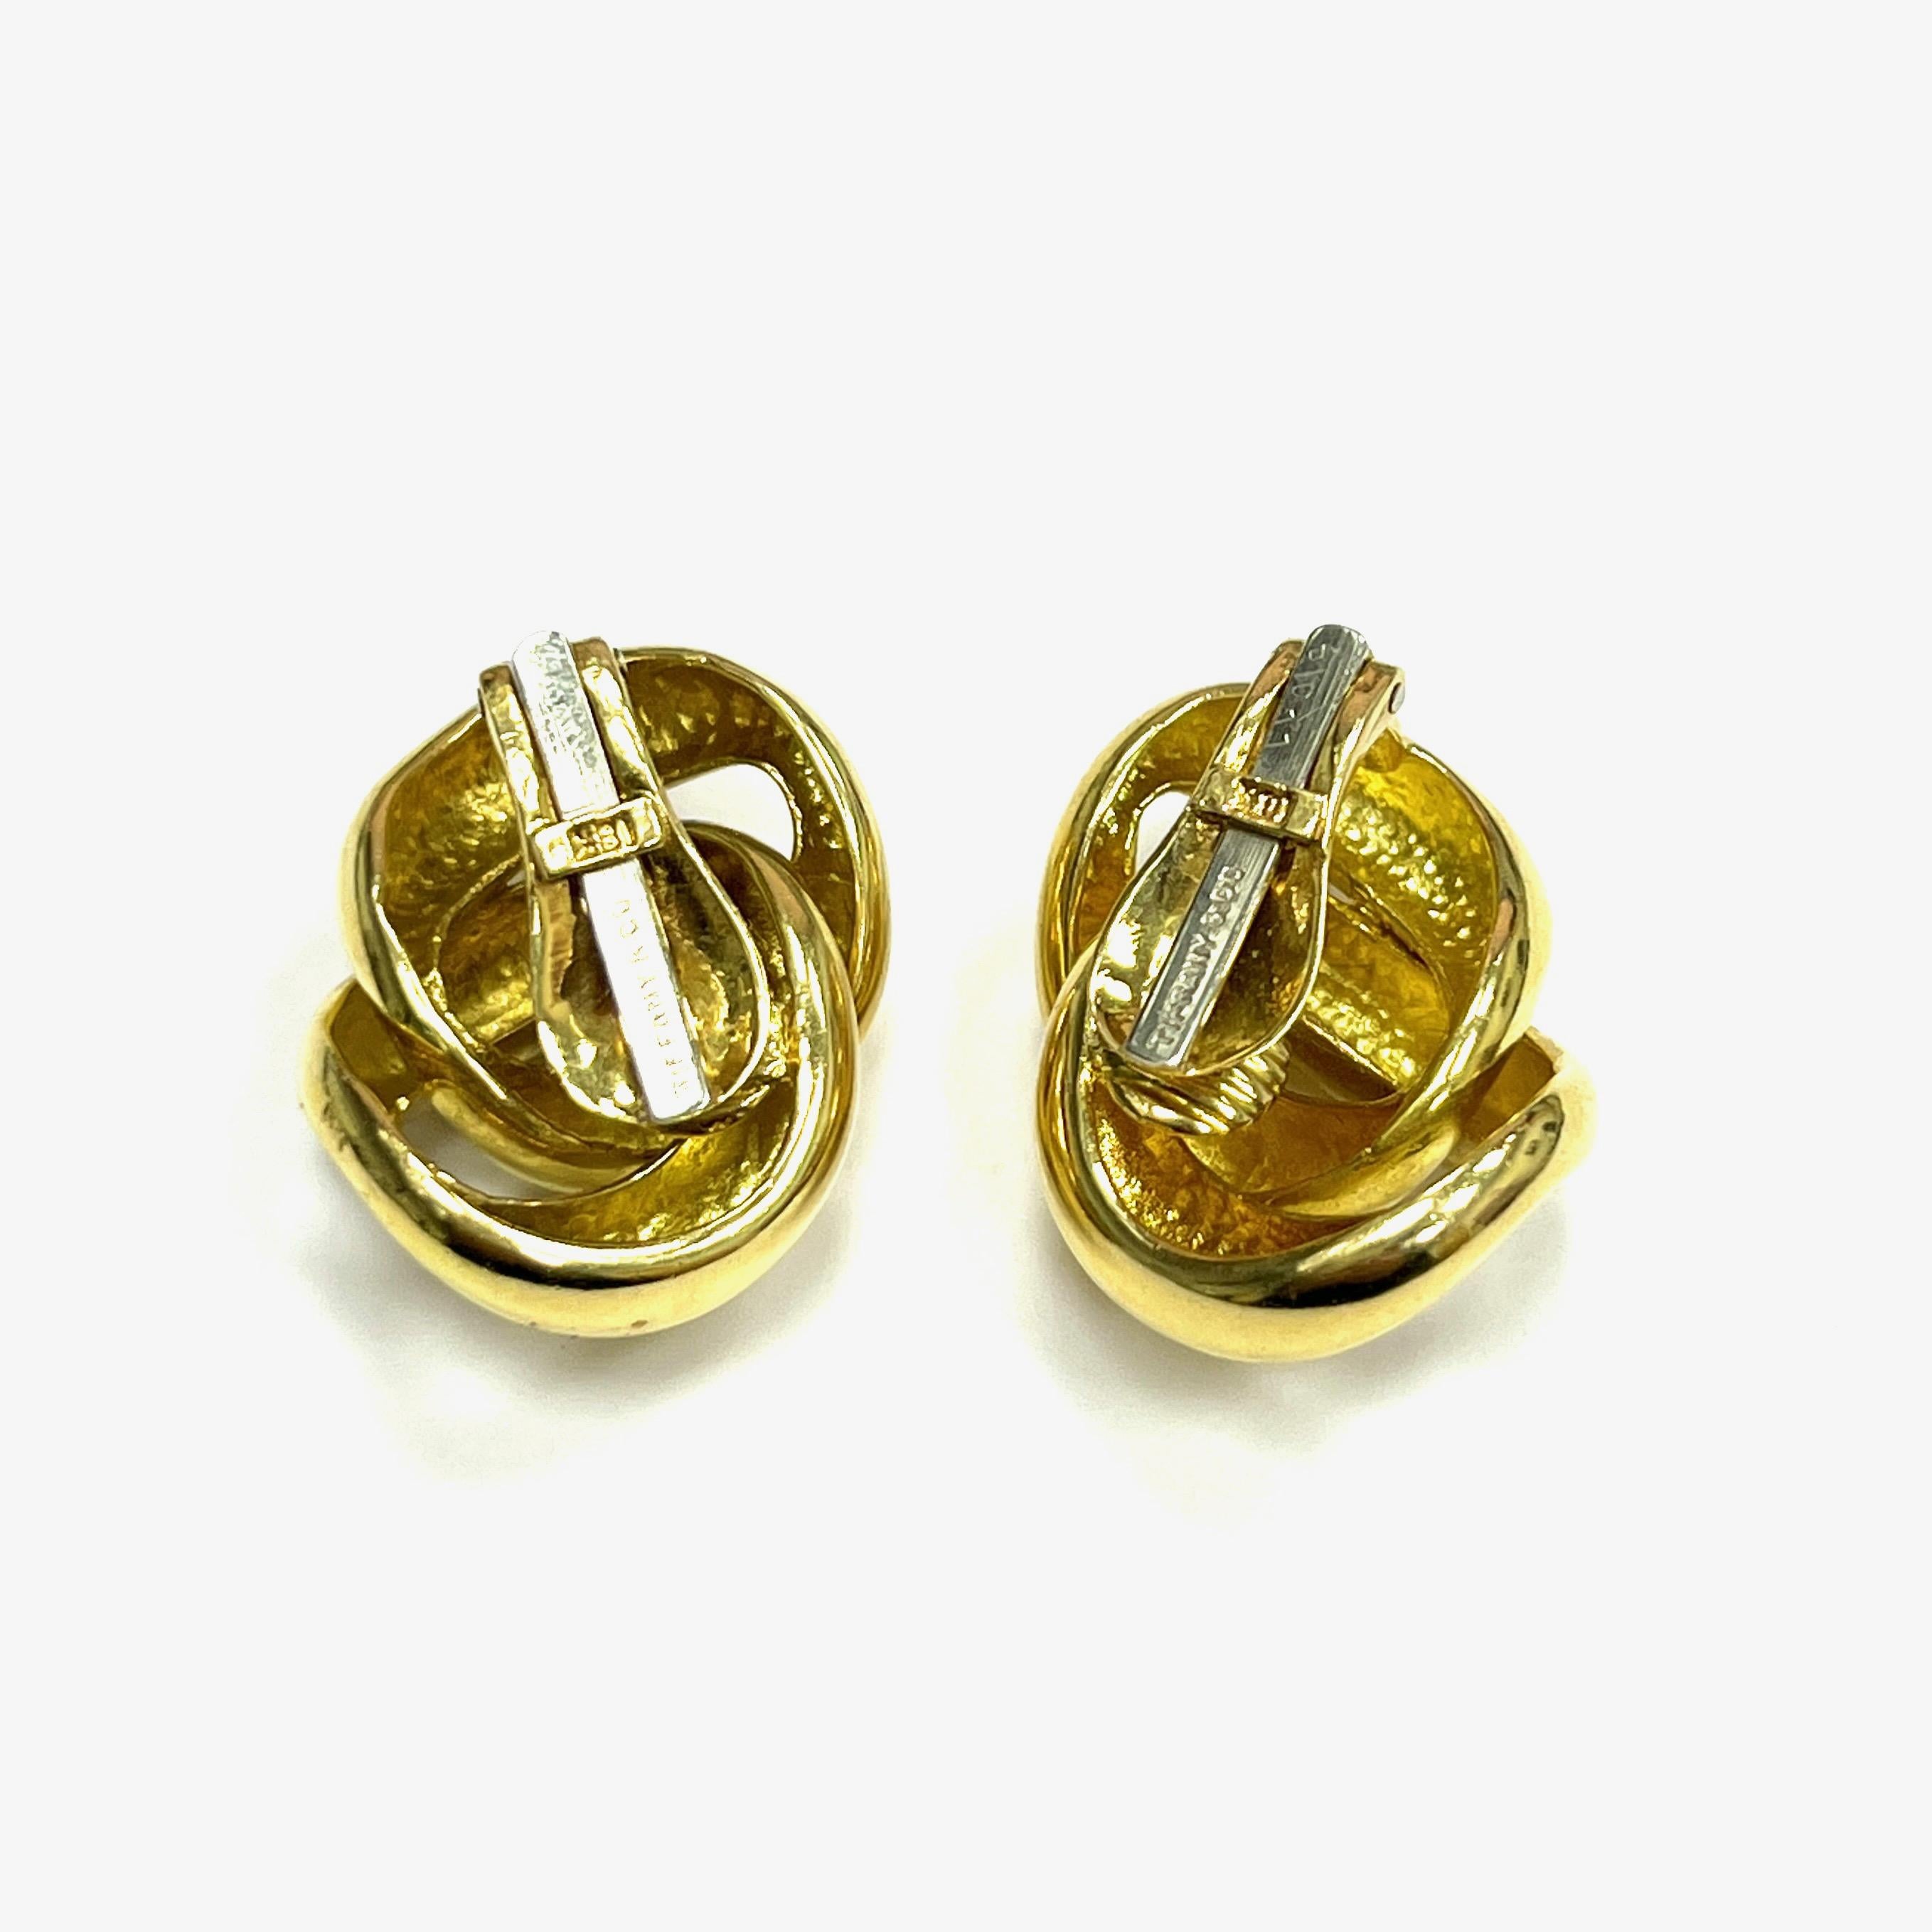 Tiffany & Co. Interlinking Gold Ear Clips In Excellent Condition For Sale In New York, NY